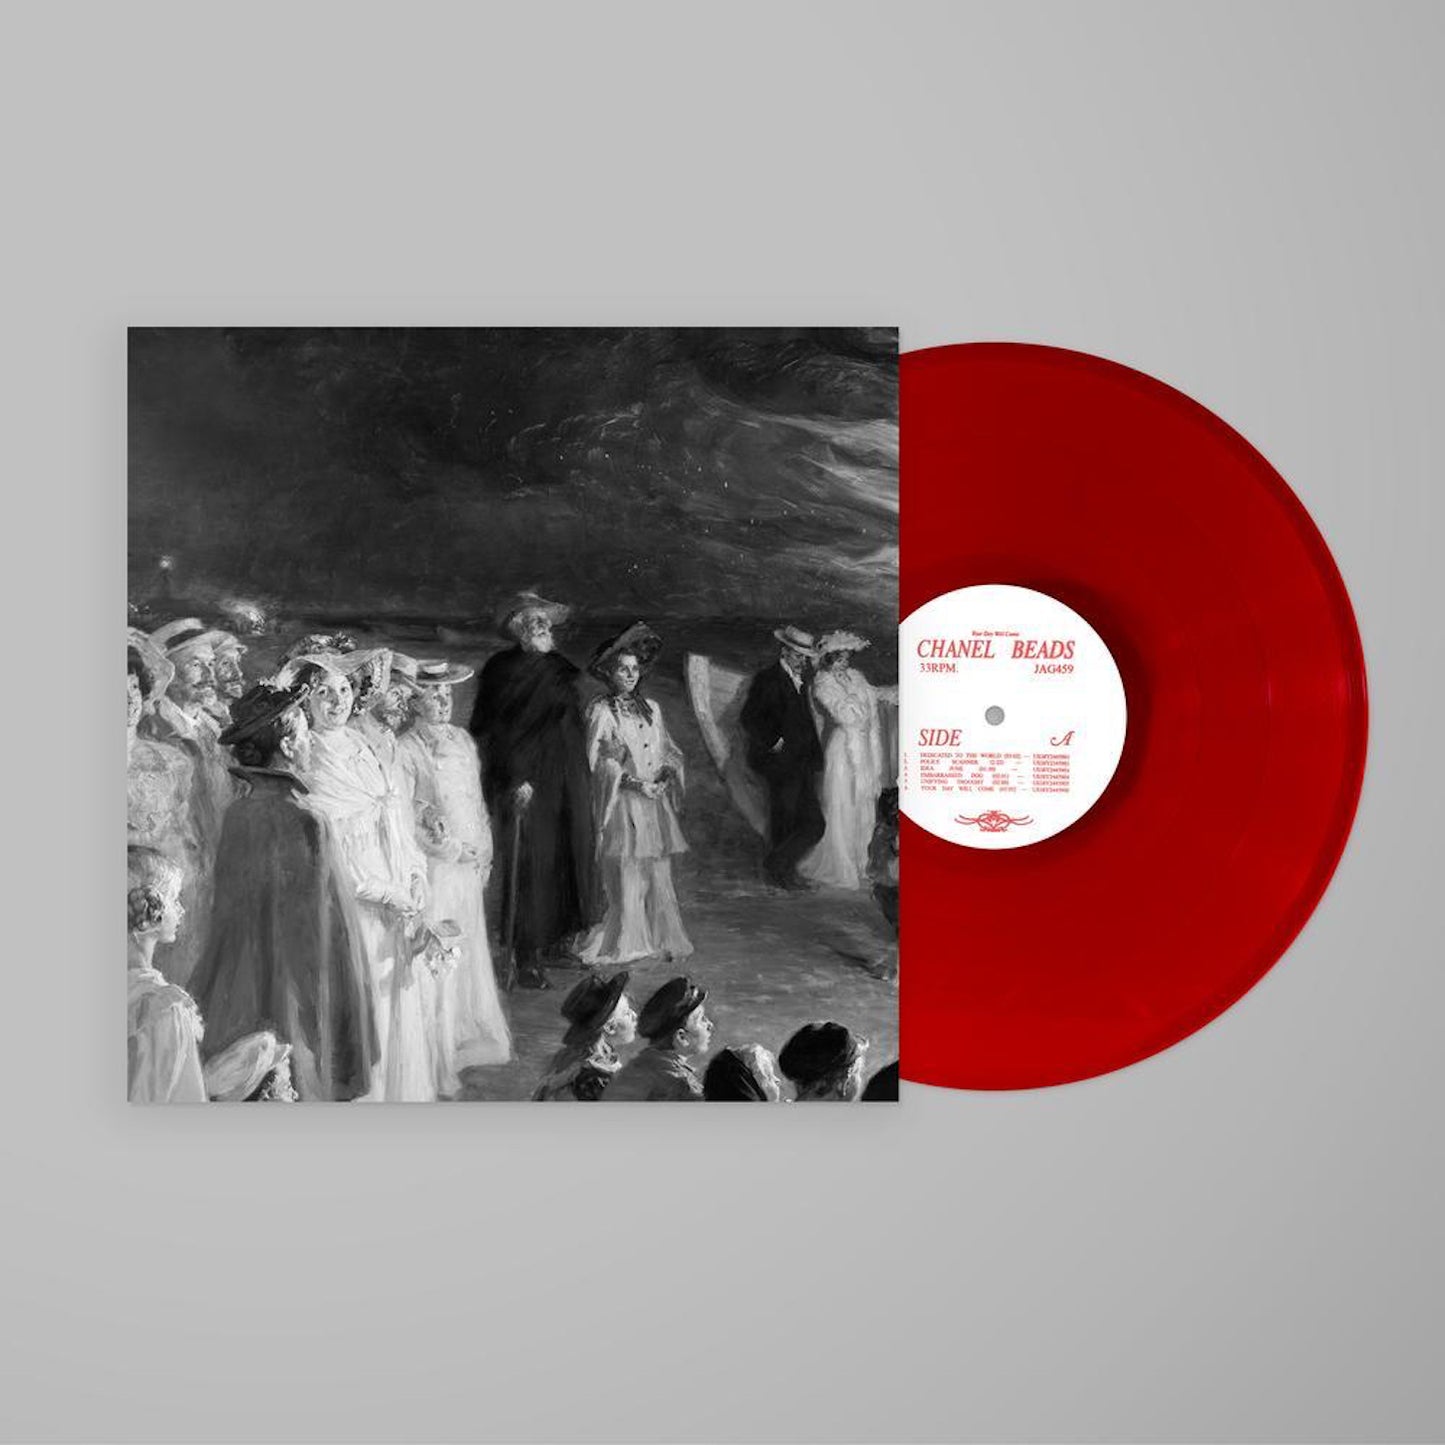 Chanel Beads - Your Day Will Come. LP [Ltd. Ed. Opaque Red Vinyl]